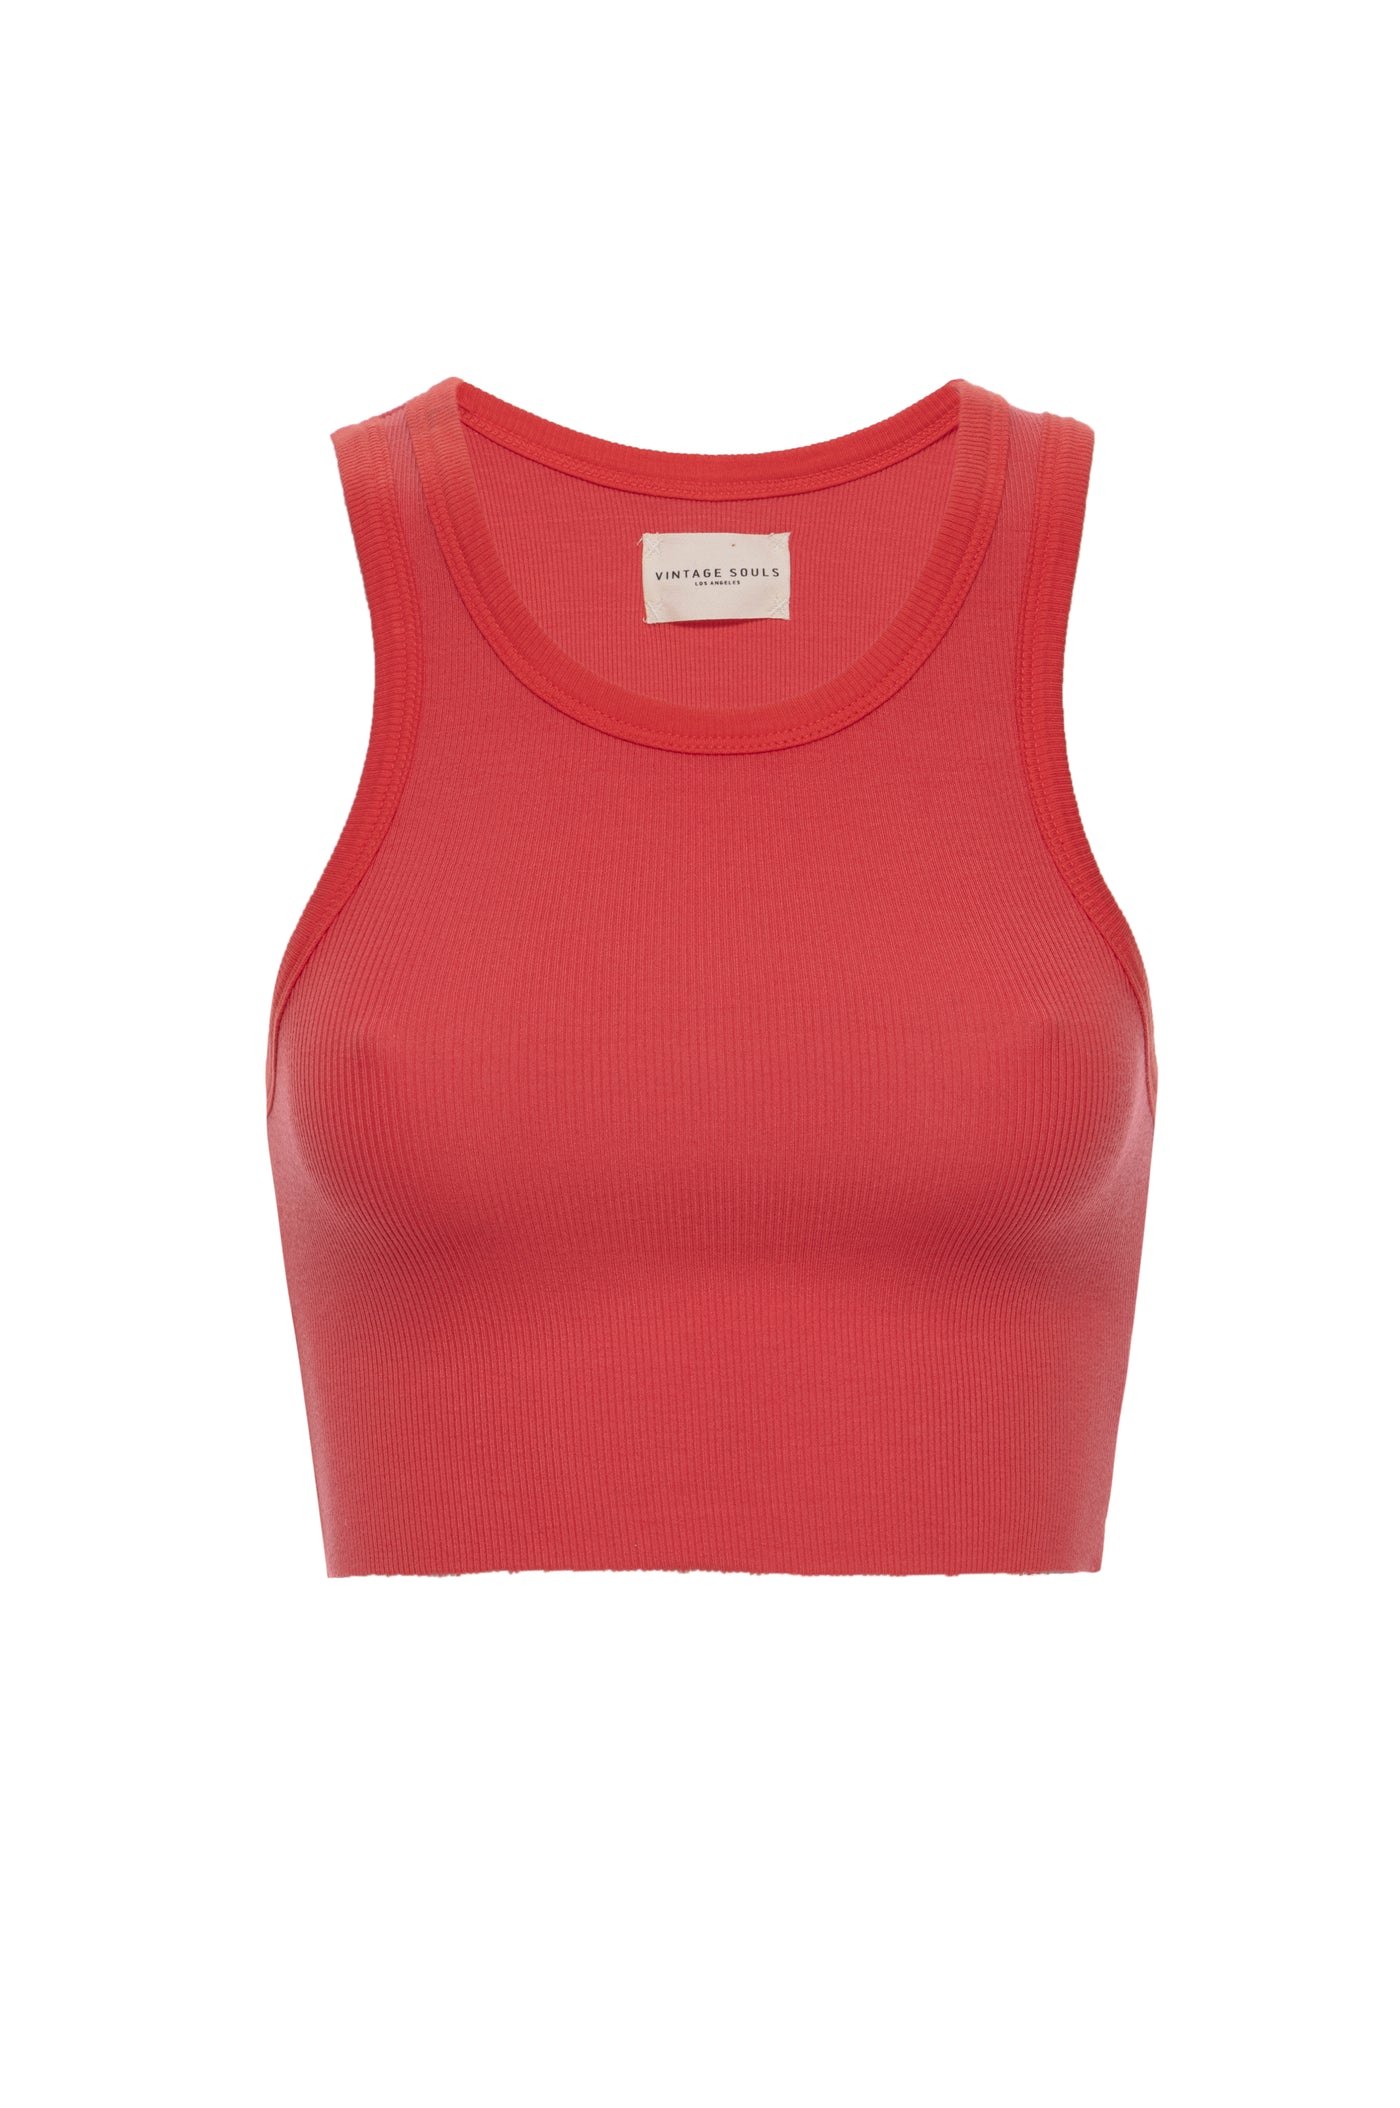 Solo display of the Fire Red Classic Crop Tank, featuring its vibrant color and soft feel.